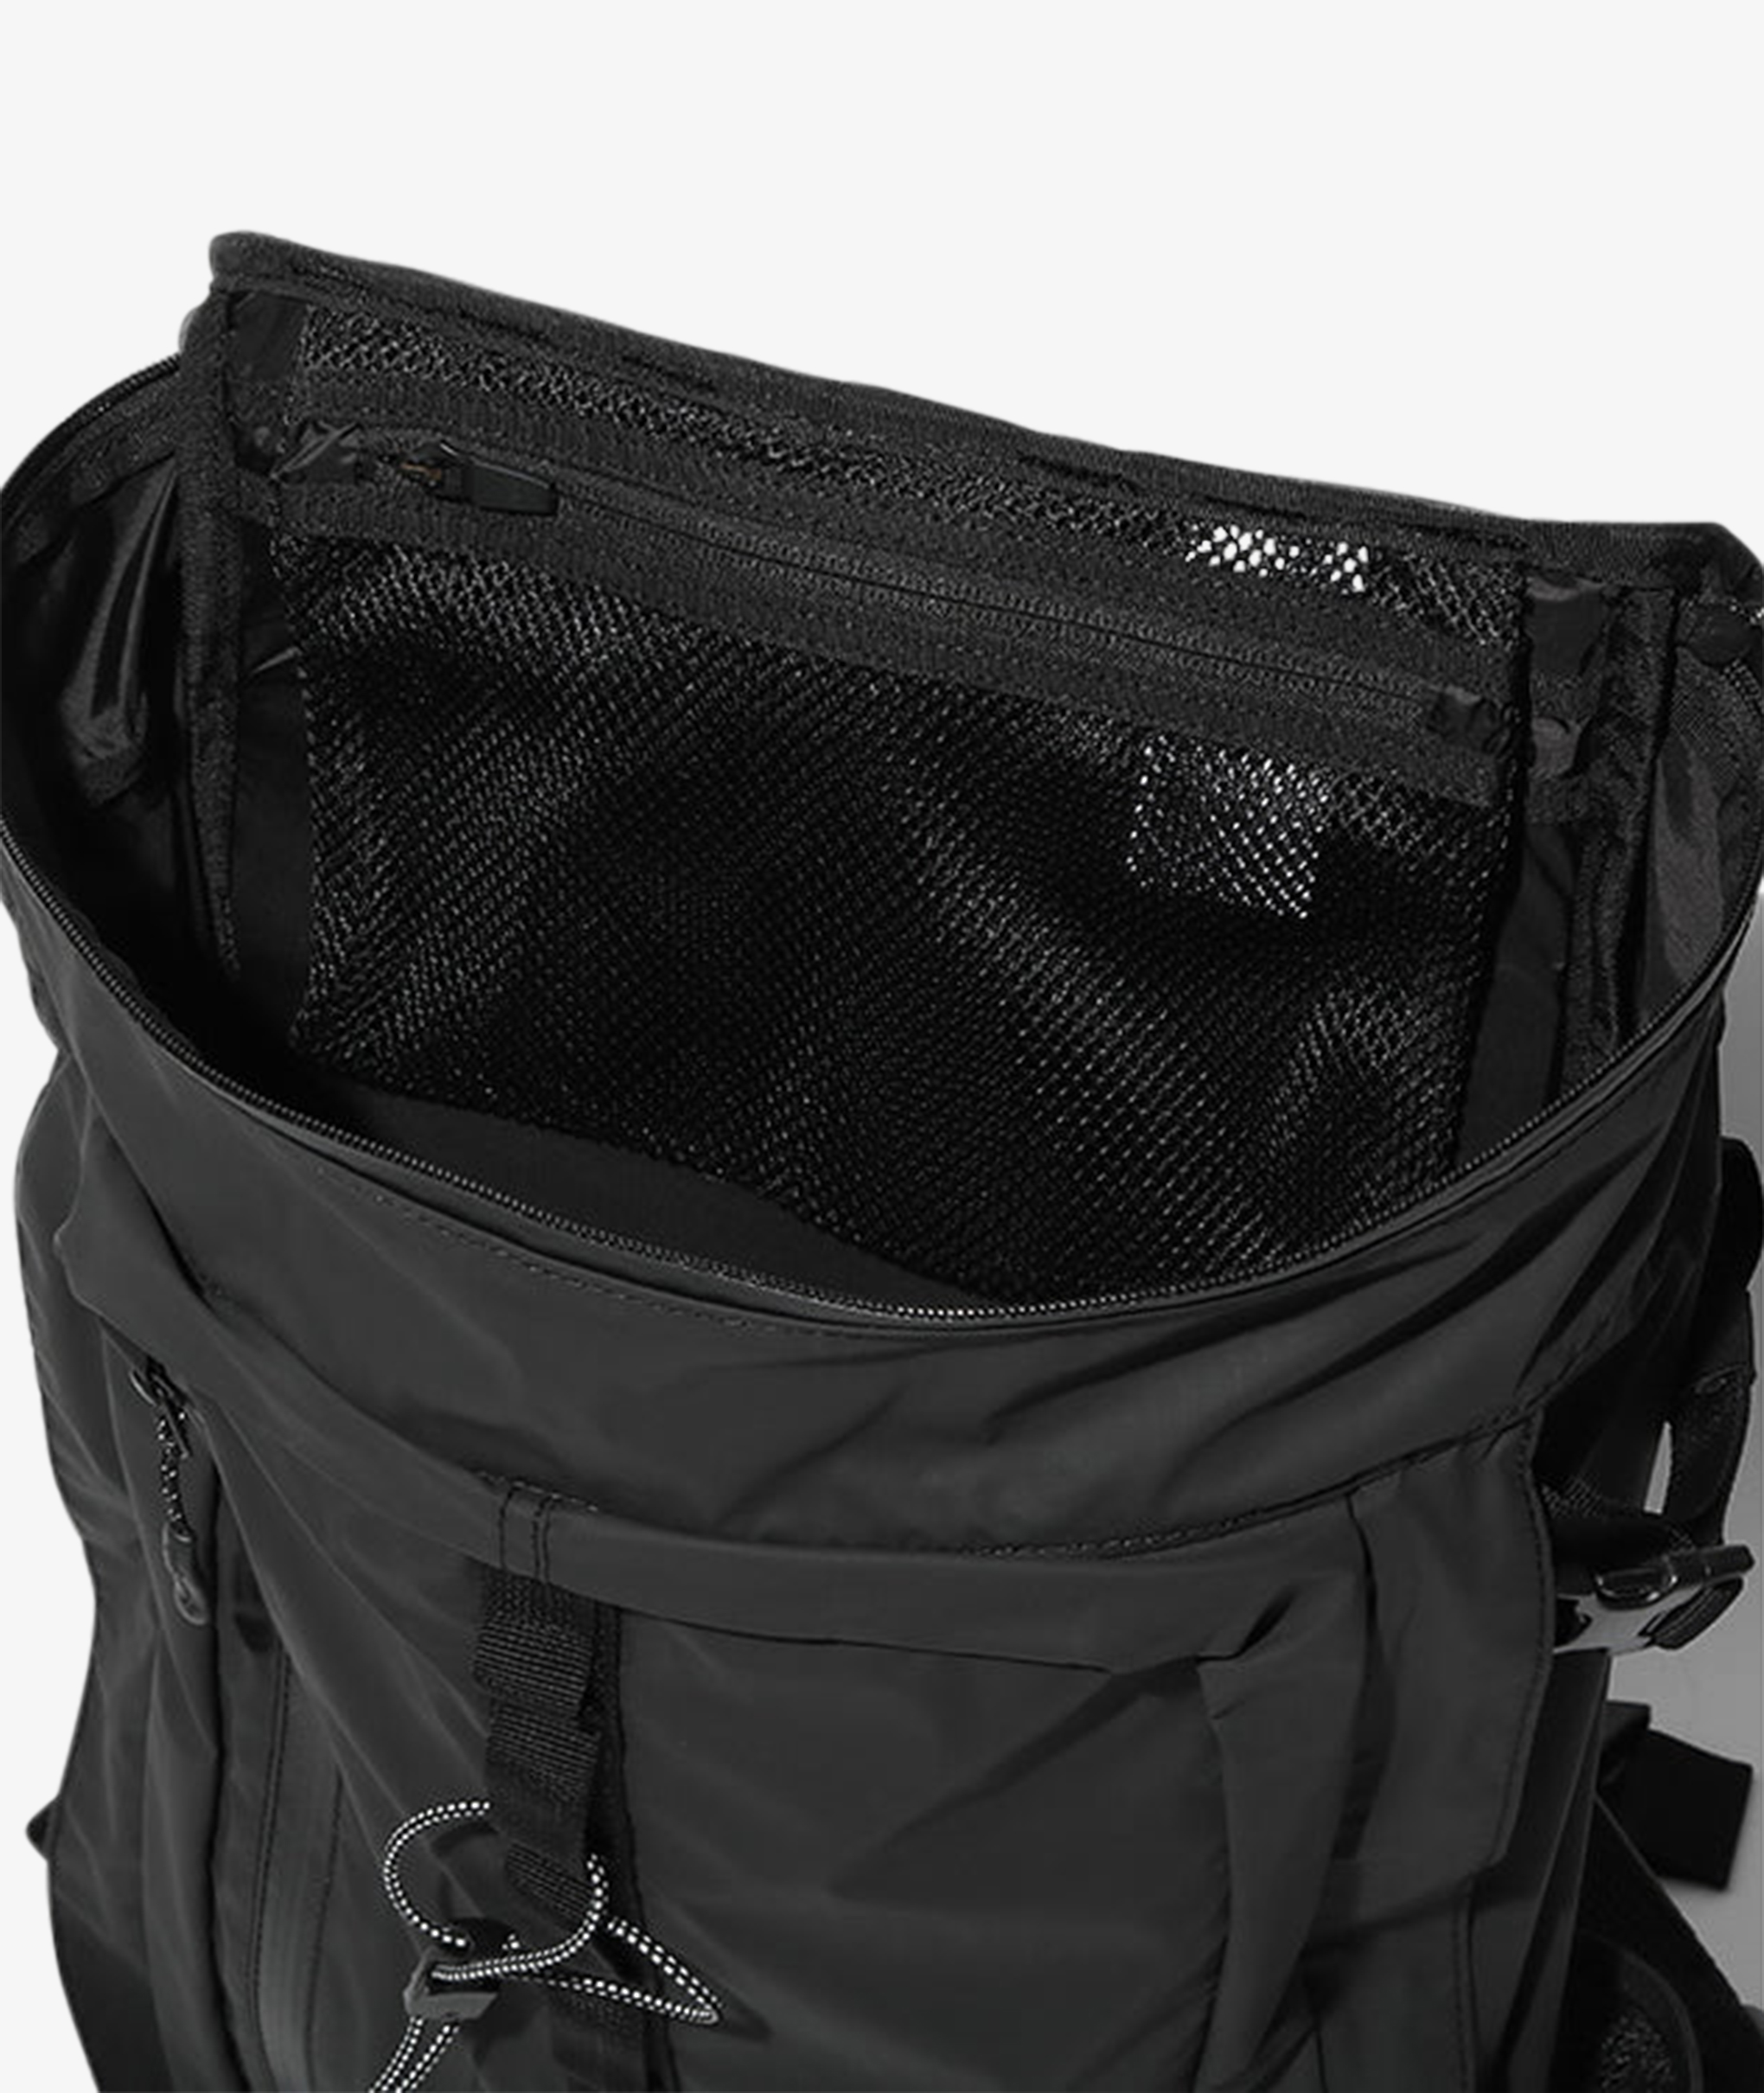 Norse Store | Shipping Worldwide - Snow Peak Active Field Backpack 